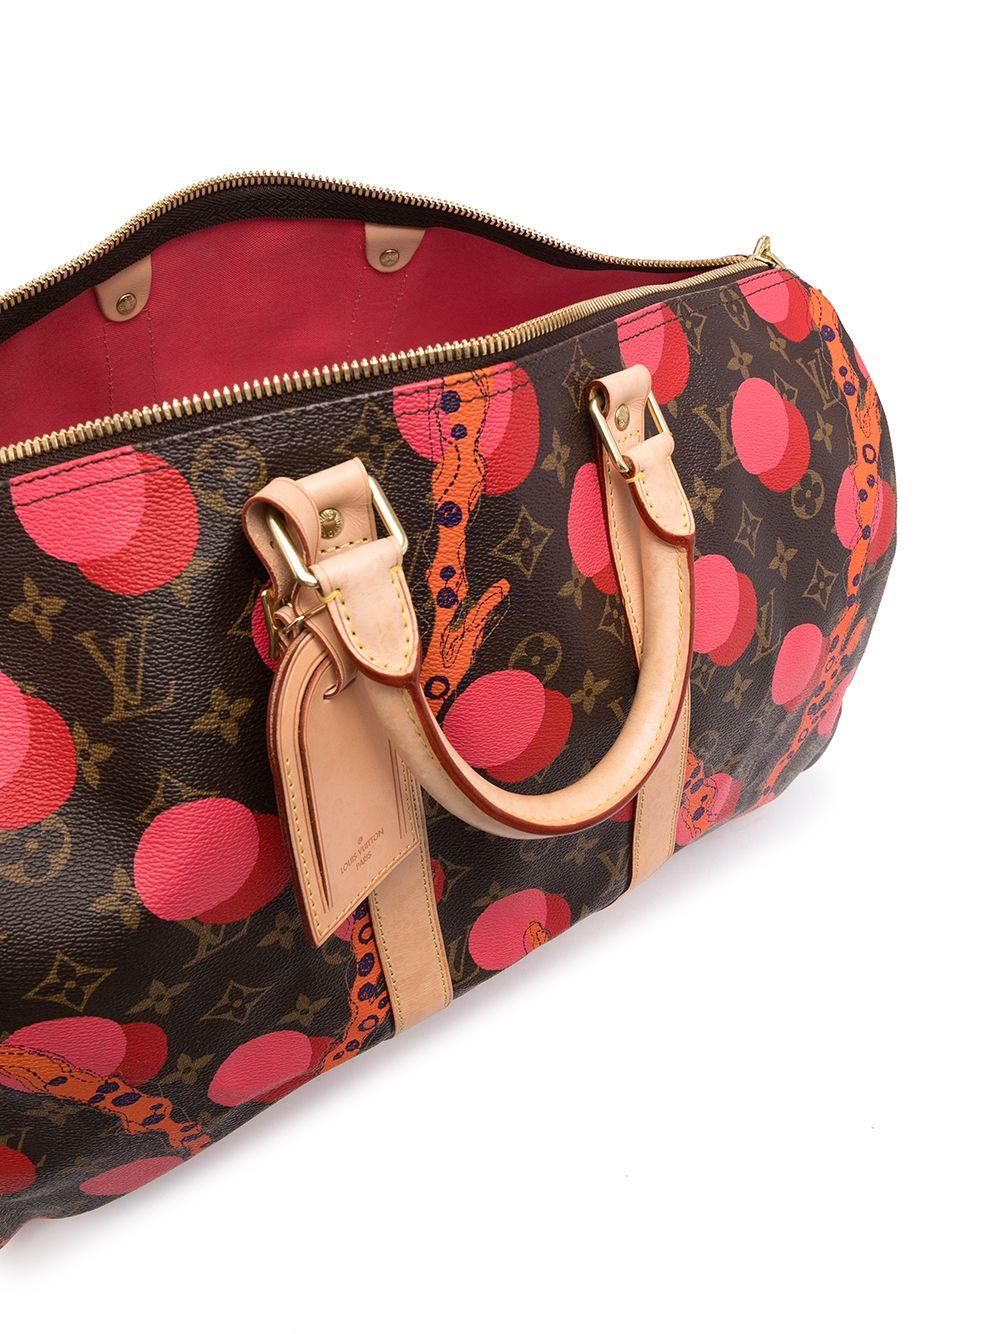 A rare piece from the Spring/Summer 2015 collection, this pre-owned Louis Vuitton Ramages Keepall features a coral summery print all over.  The capacious size means It's perfect for overnight stays and weekends away.

Colour: